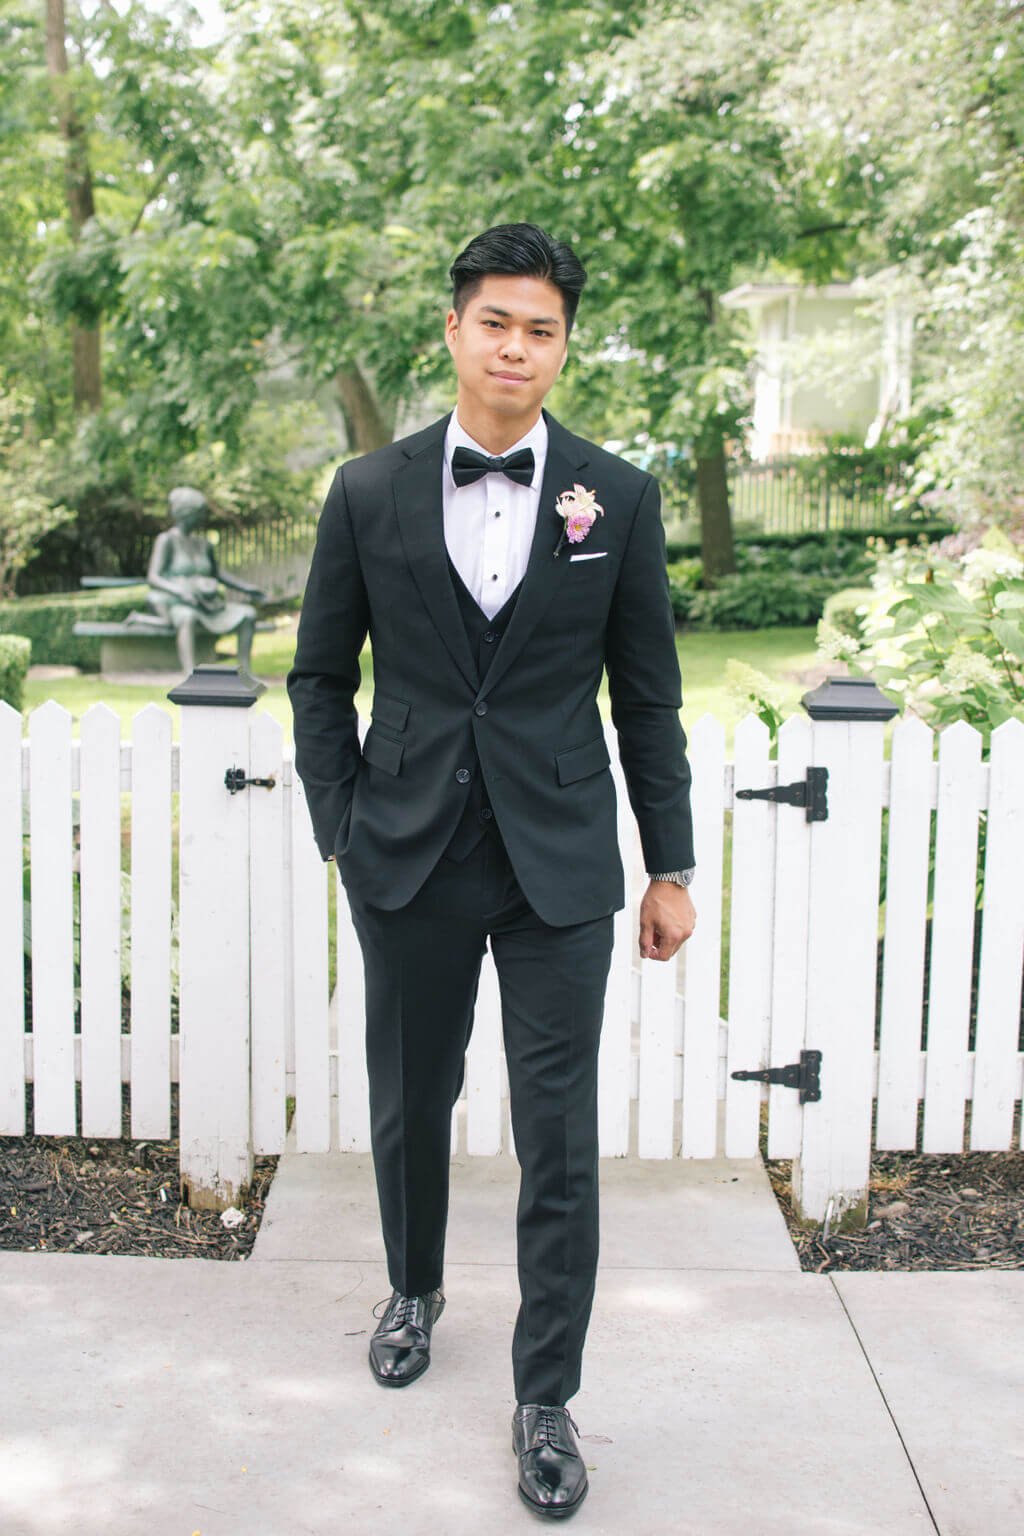 Black Tie groom style for bride and groom's modern wedding at The Doctor's House